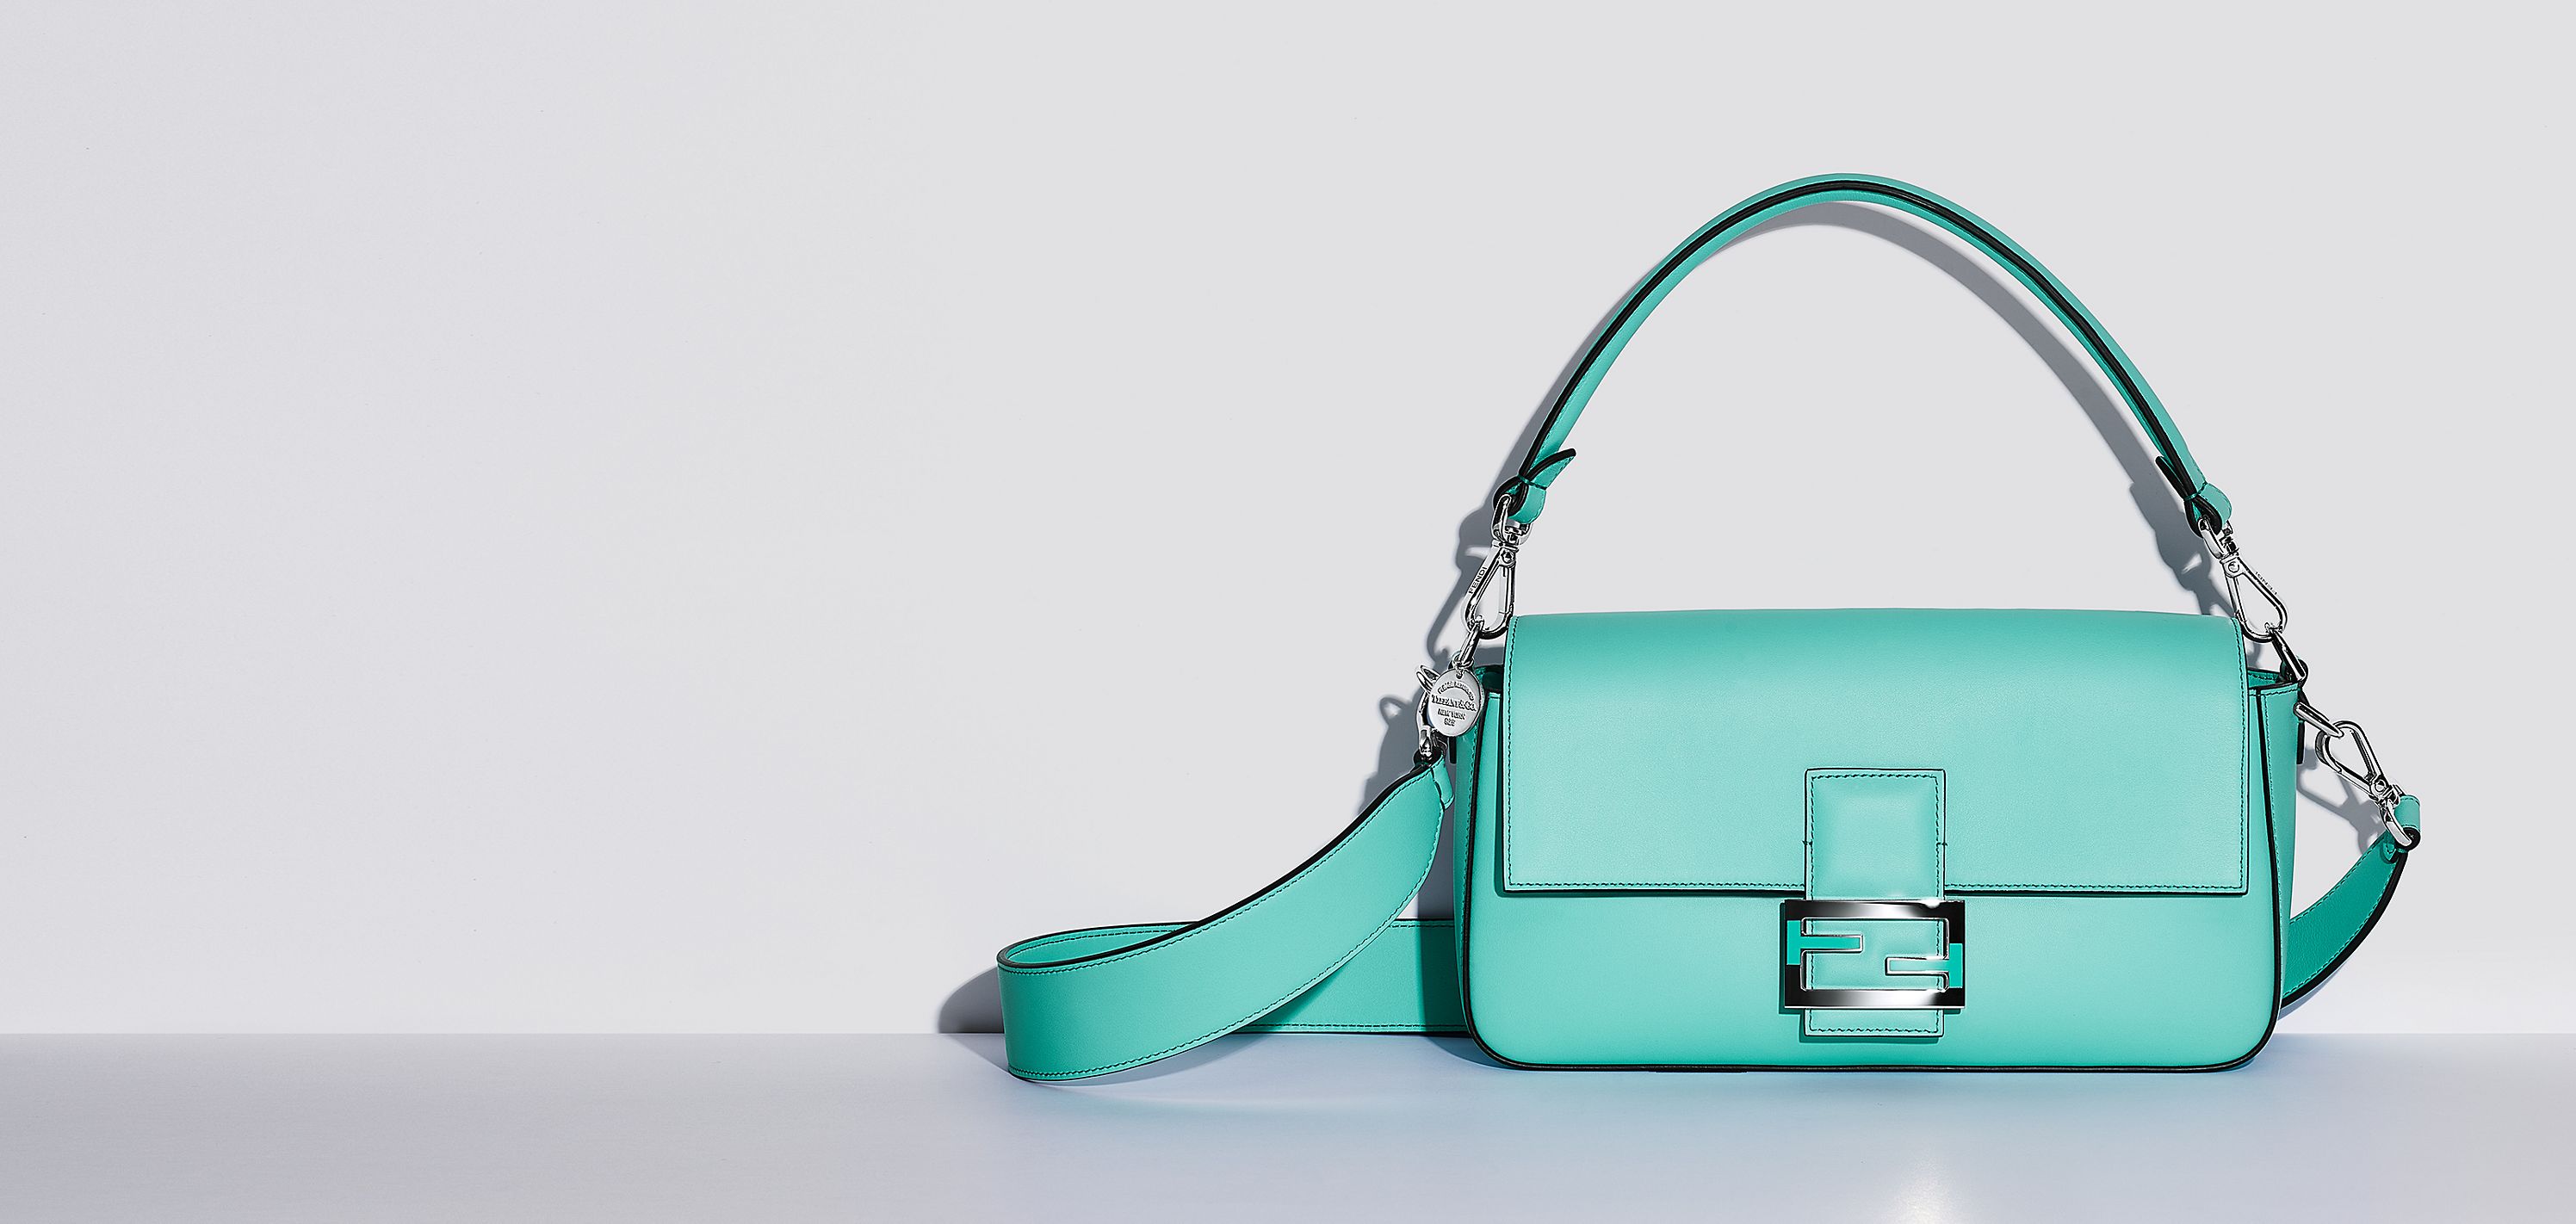 Coming Soon: The Tiffany Baguette